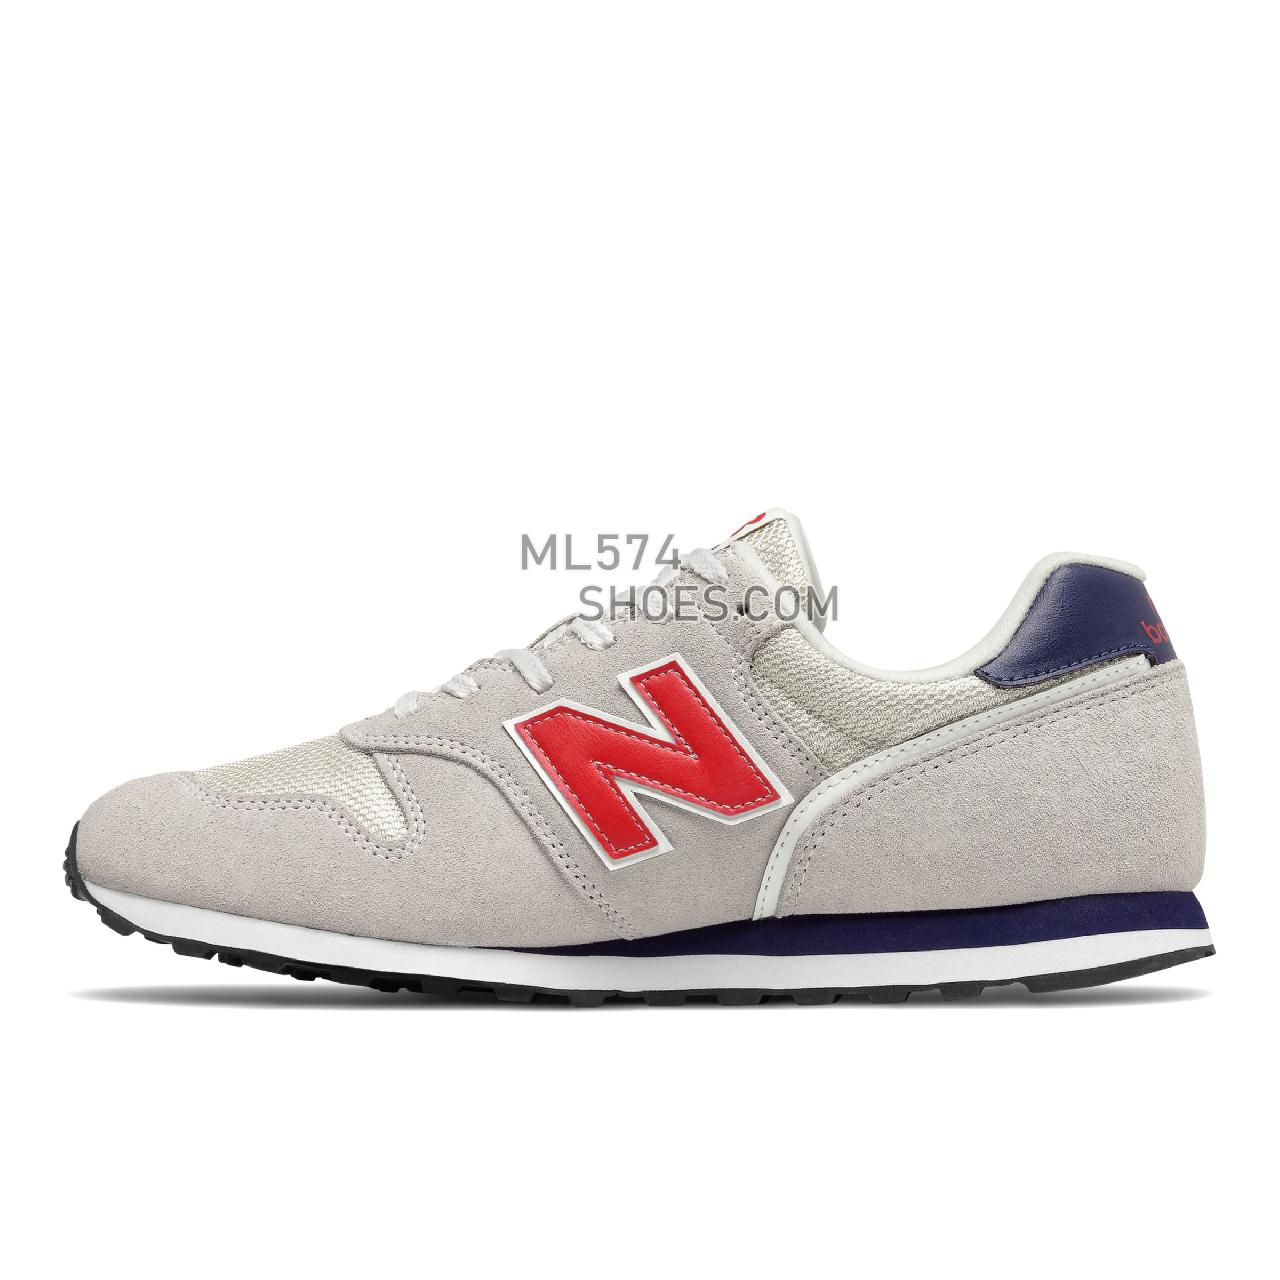 New Balance 373v2 - Men's Classic Sneakers - Off-white with Red - ML373CO2